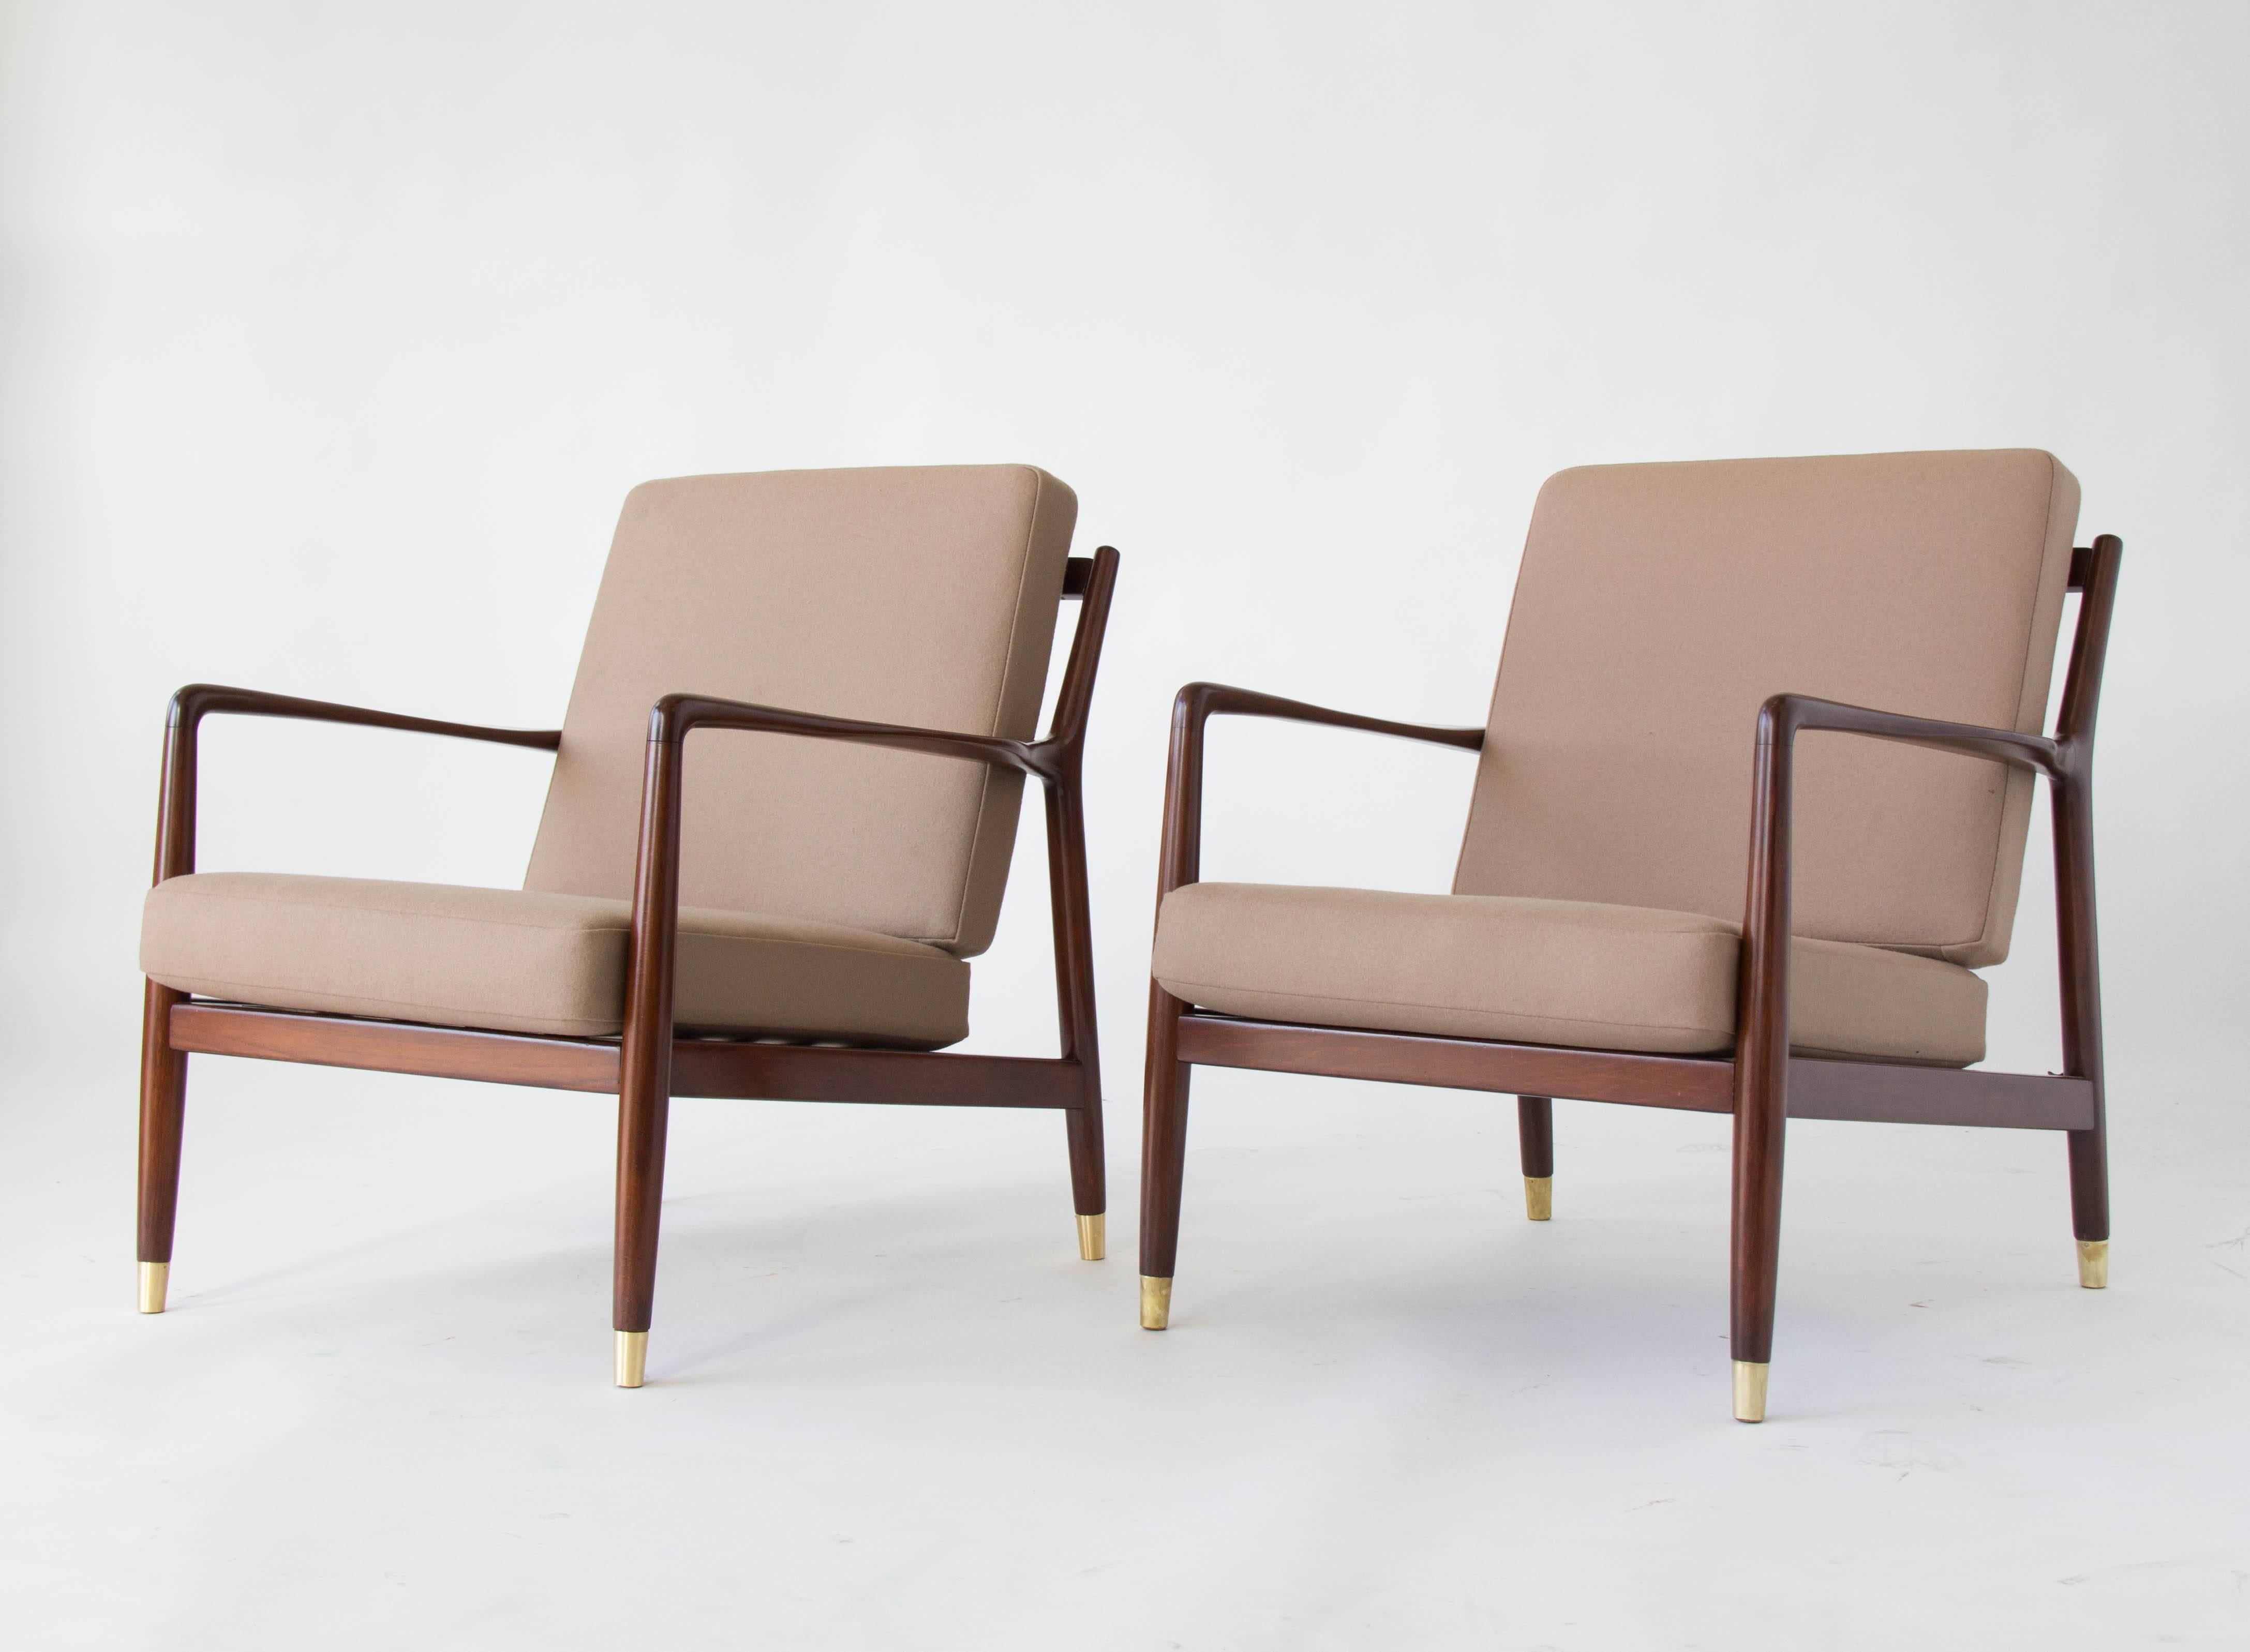 Pair of Lounge Chairs with Brass-Capped Legs by Folke Ohlsson for DUX (Skandinavische Moderne)